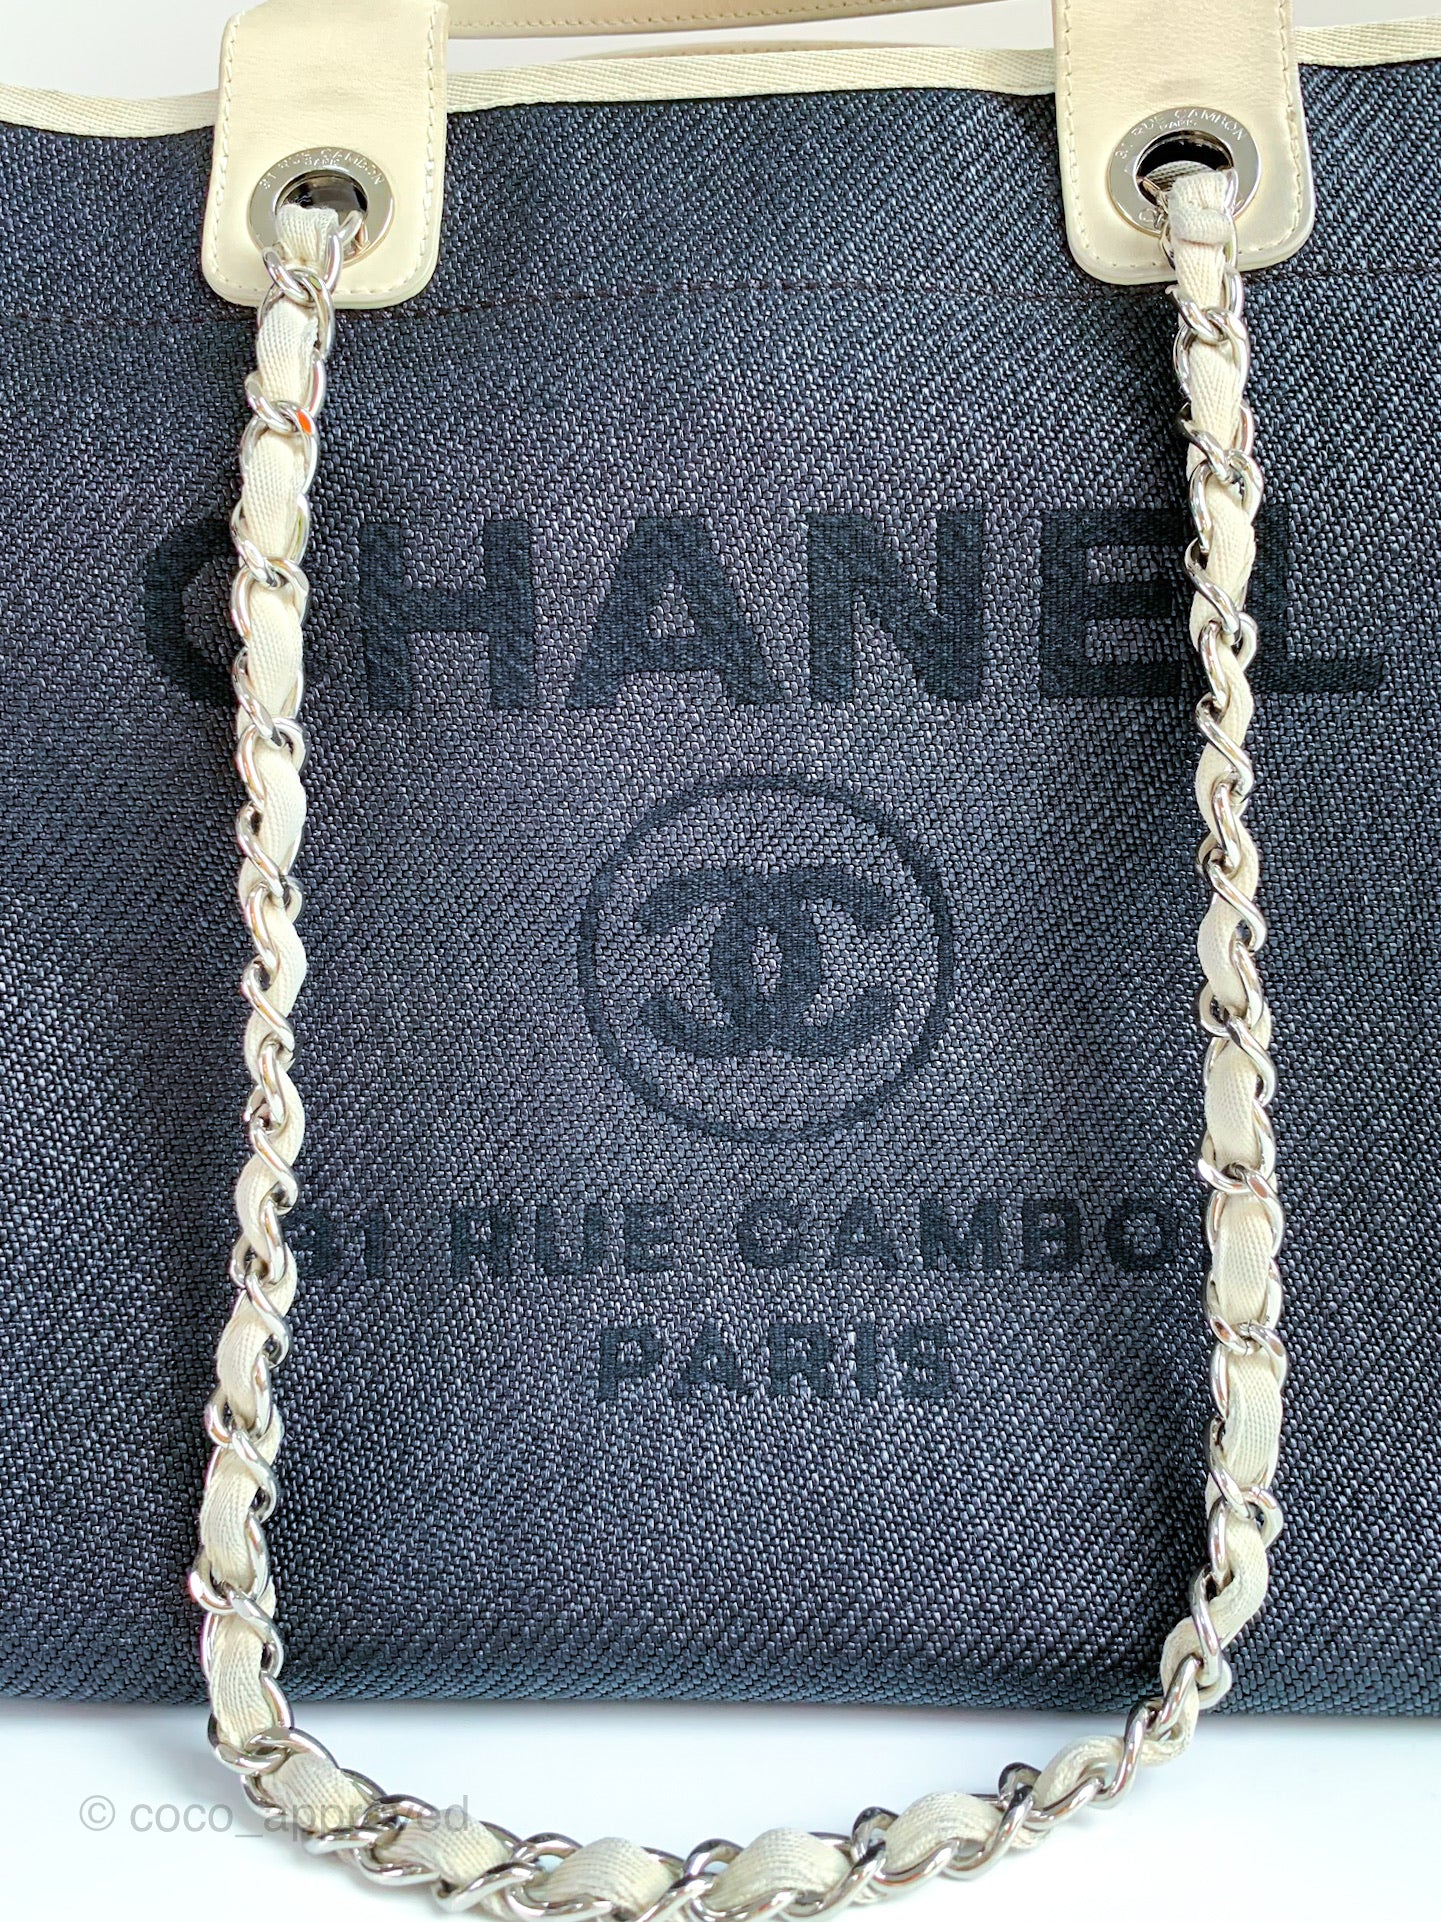 Chanel Deauville Large with Handles and Pouch, Beige with Light Gold  Hardware, New in Box GA001 - Julia Rose Boston